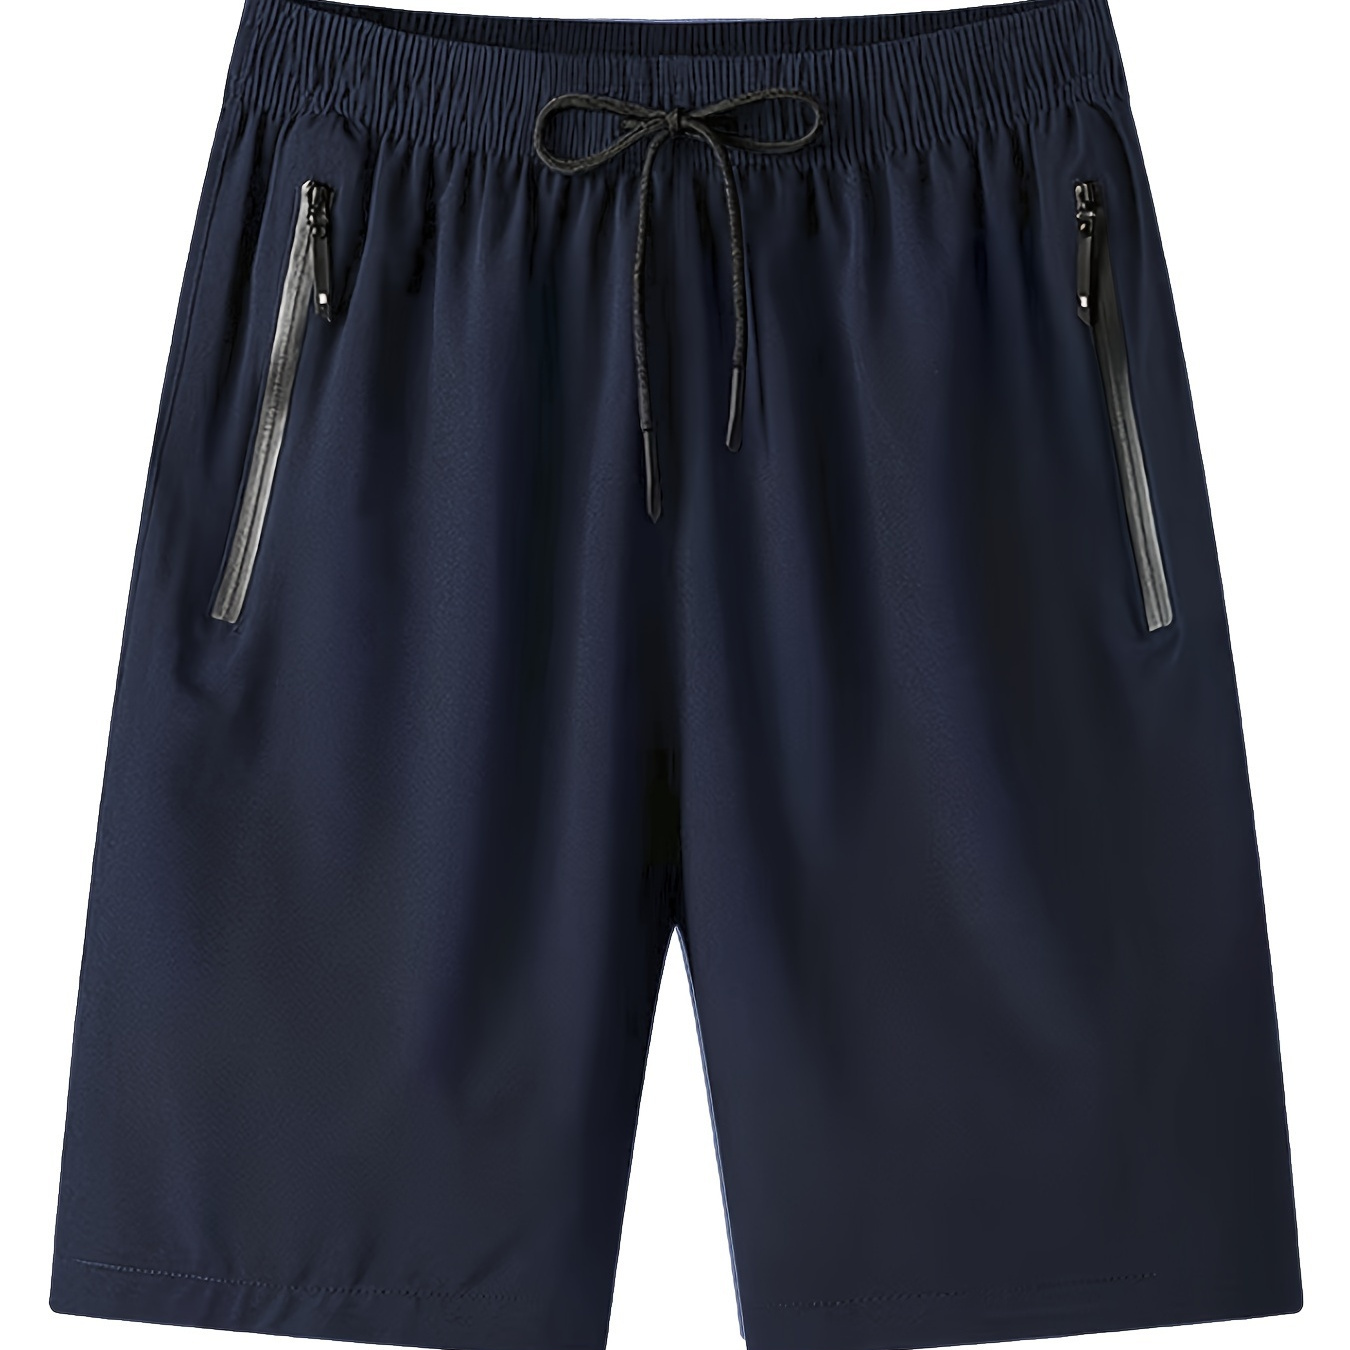 

Men's Fashion Casual Loose Fit Quick Dry Shorts, Sporty Shorts With Drawstring And Zip Pockets, Bermuda Shorts